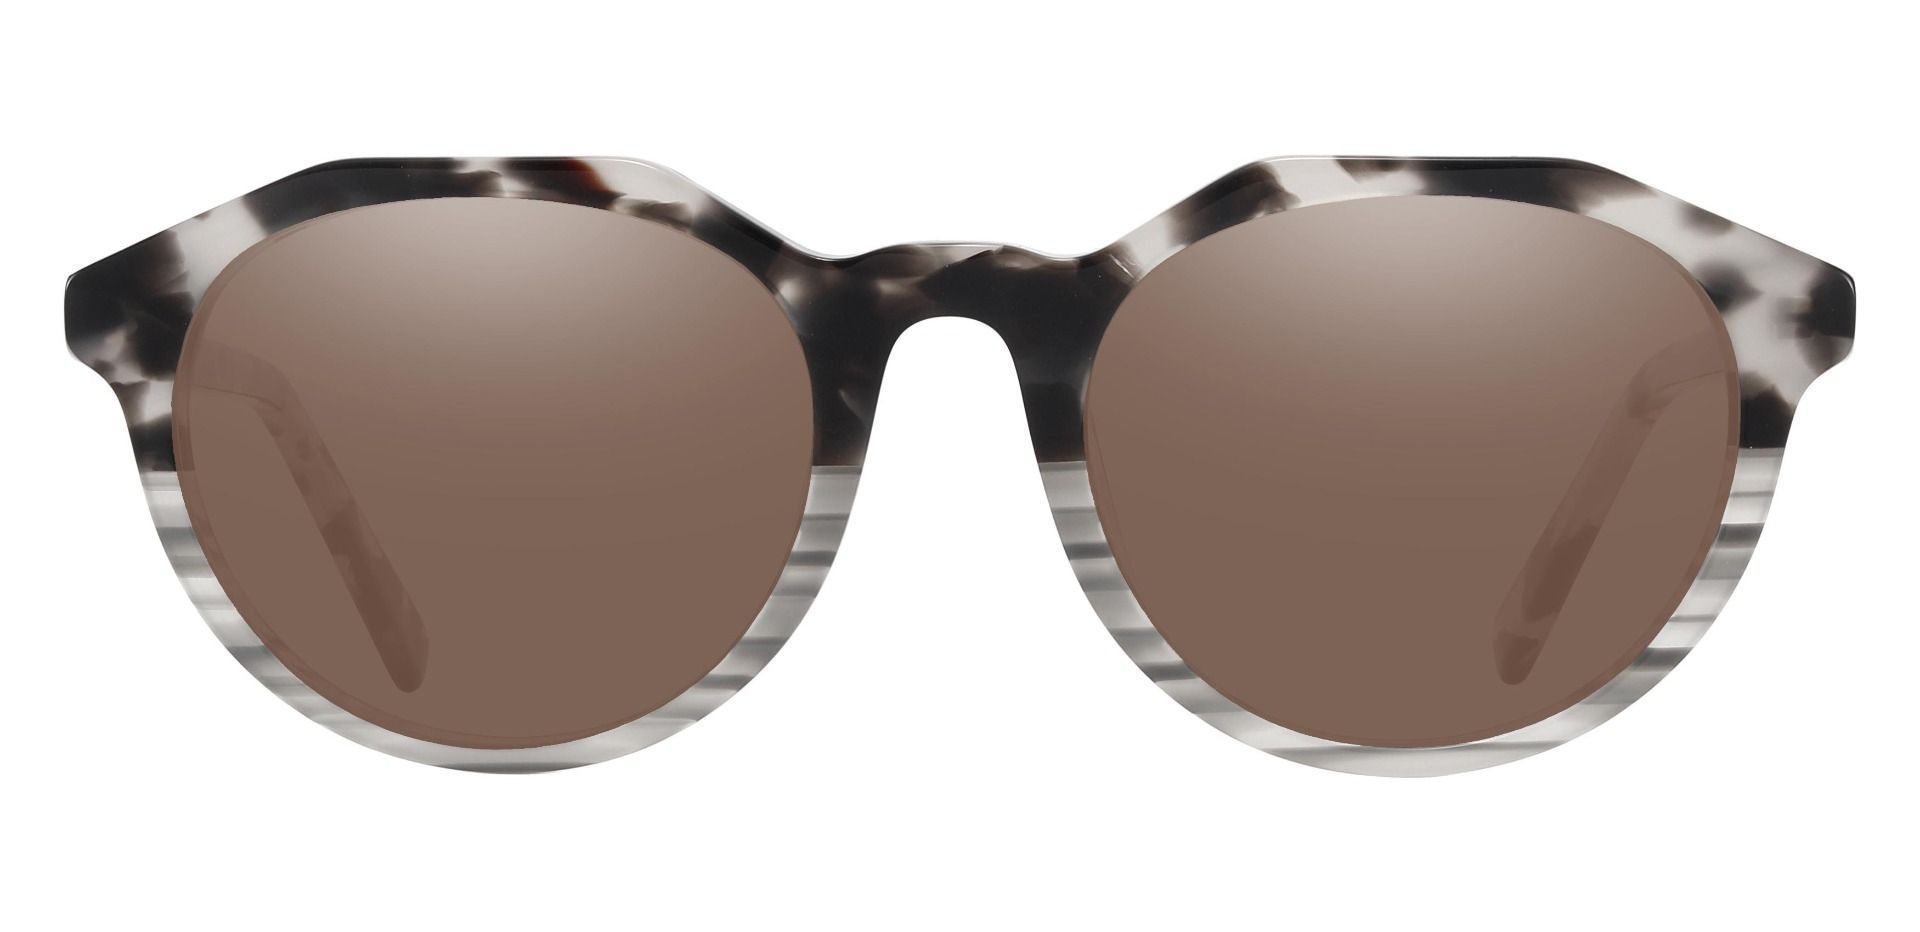 Mayfield Oval Prescription Sunglasses - Black Frame With Brown Lenses